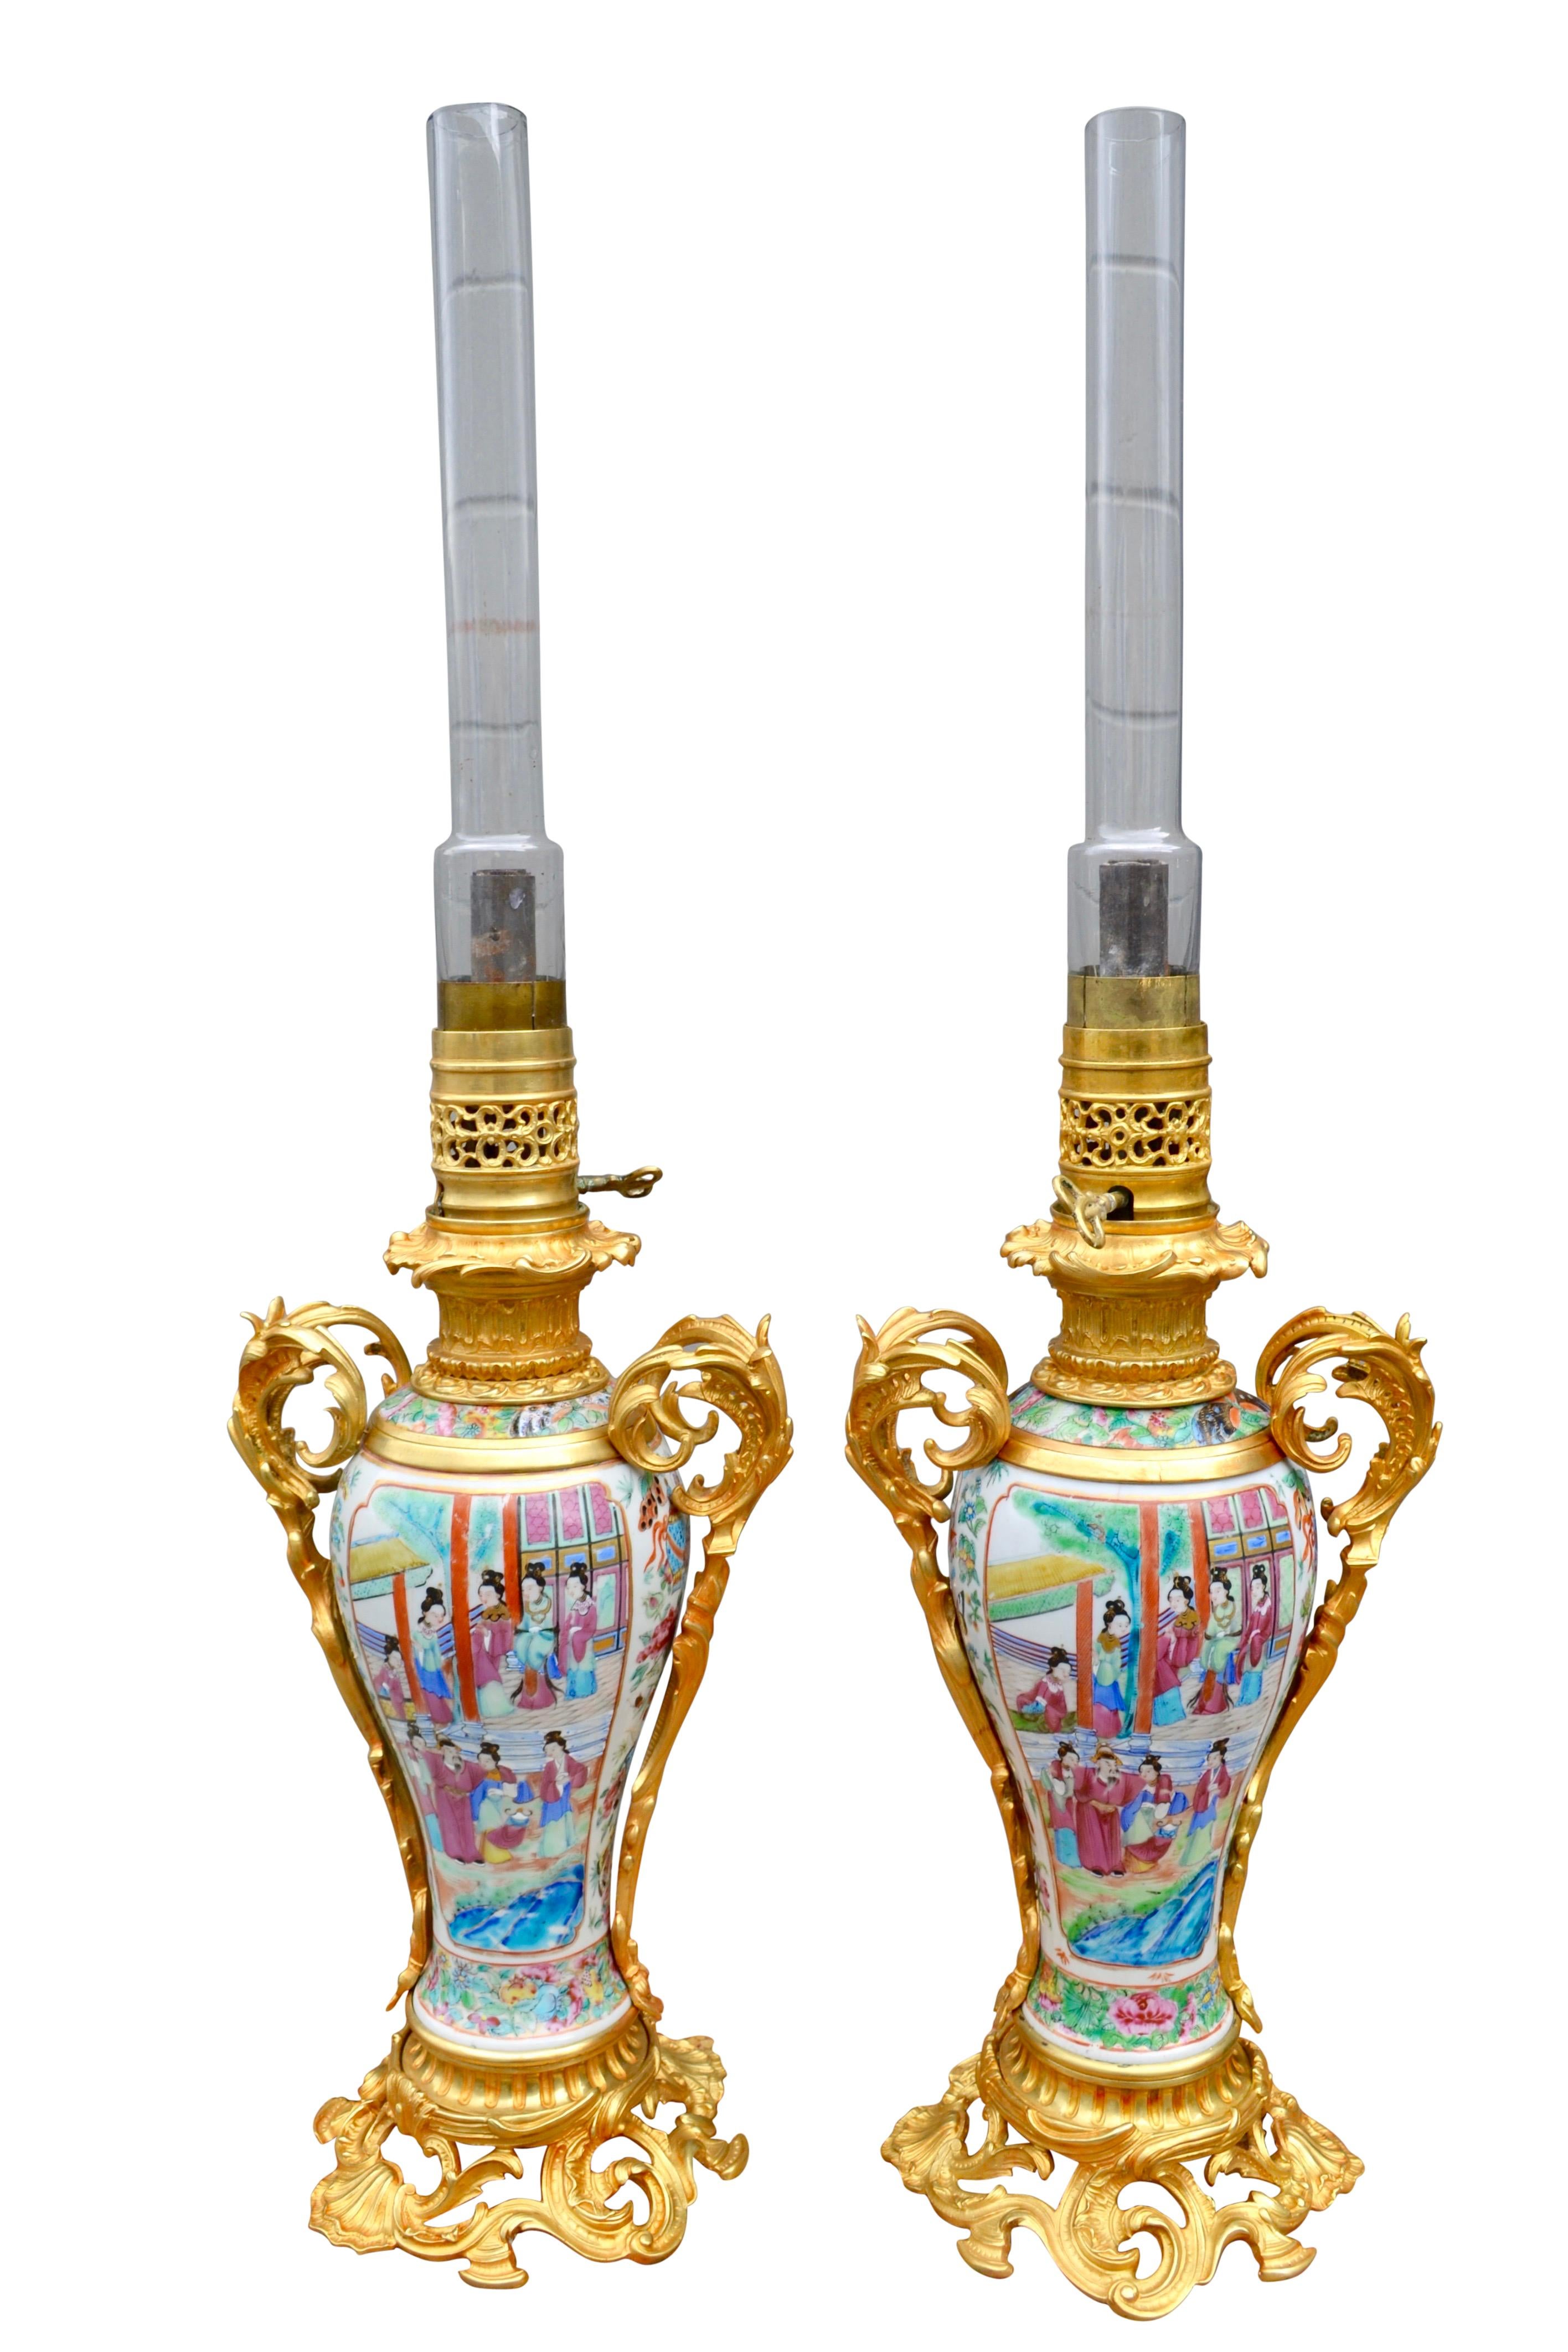 Rare Pair of Famille Rose Porcelain and Ormolu Napoleon III Oil Lamps In Good Condition For Sale In Vancouver, British Columbia